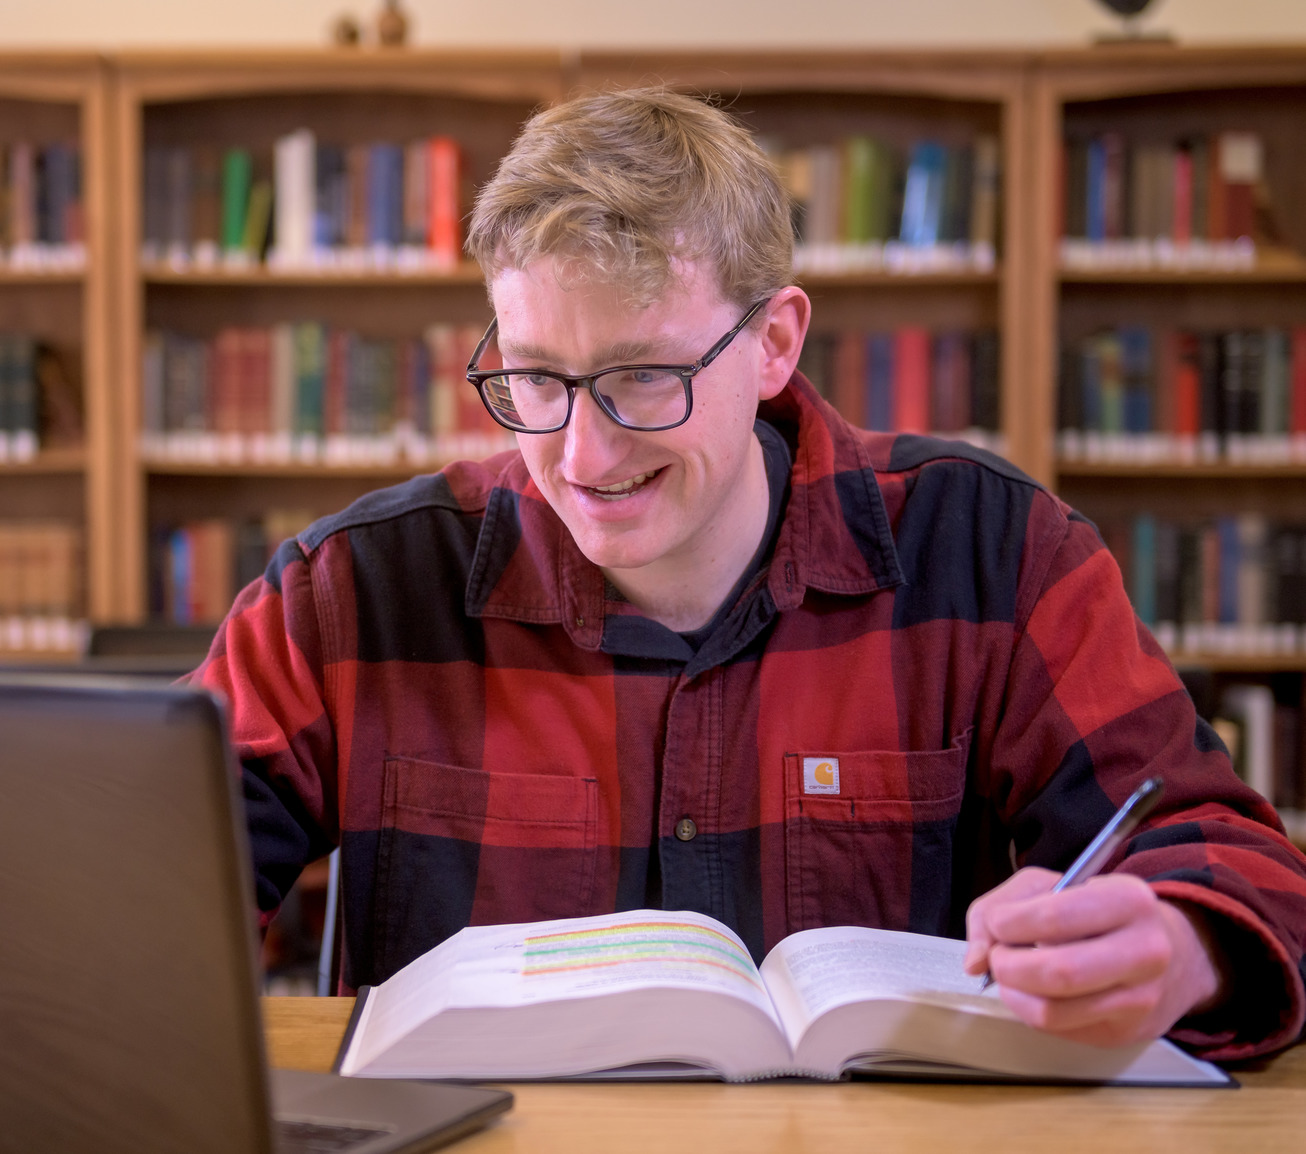 A student in a red and black plaid shirt studies with books in the background.